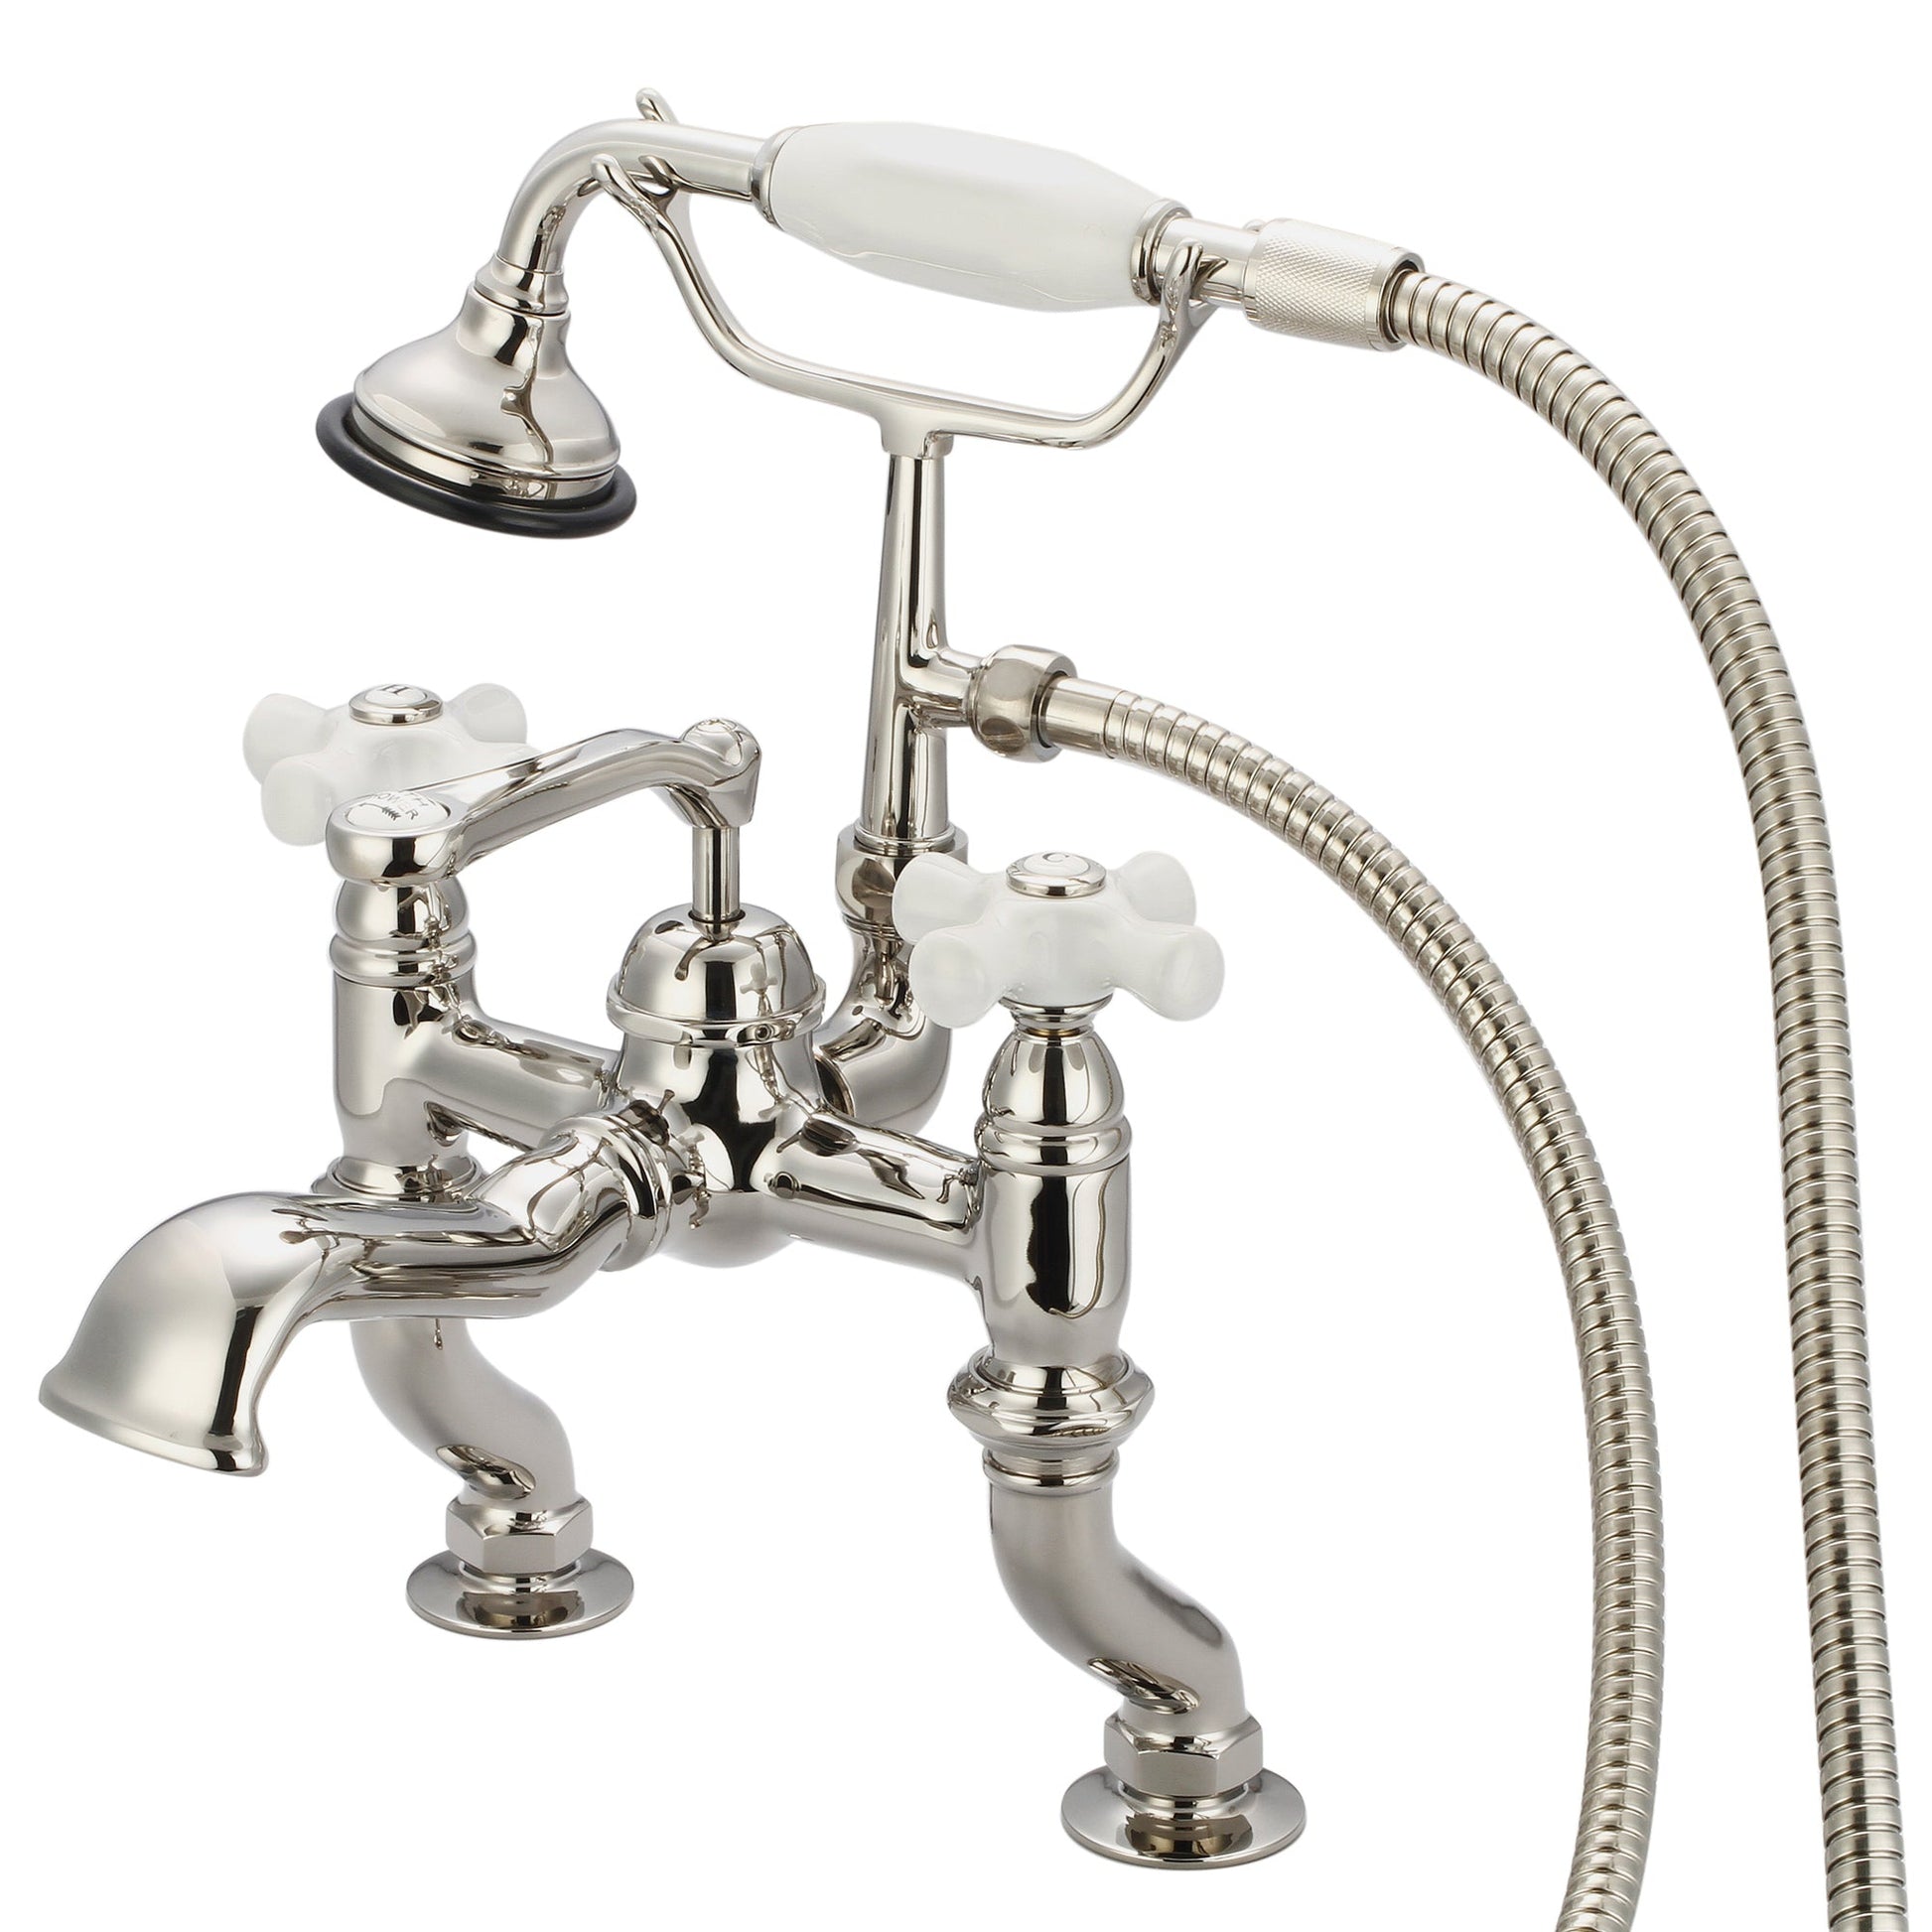 Water Creation Vintage Classic Adjustable Center Deck Mount Tub F6-0004 3.25" Ivory Solid Brass Faucet With Handheld Shower And Porcelain Cross Handles, Hot And Cold Labels Included